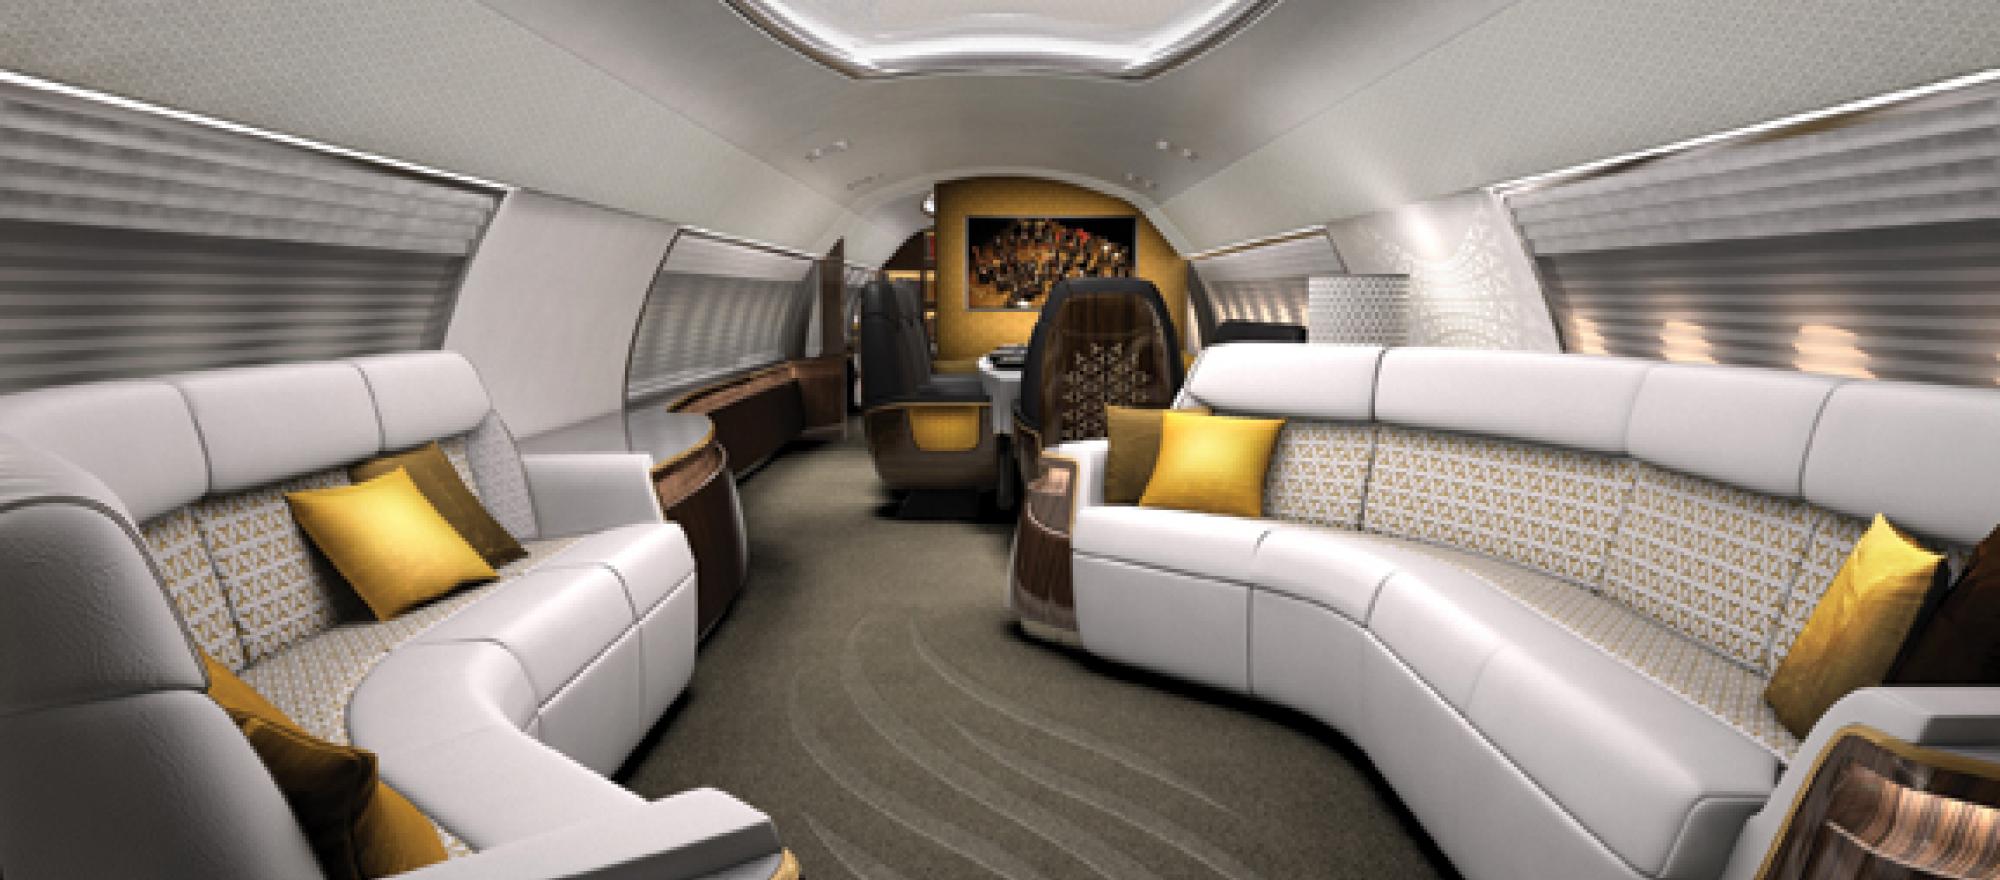 Large-cabin jets at turboprop prices 